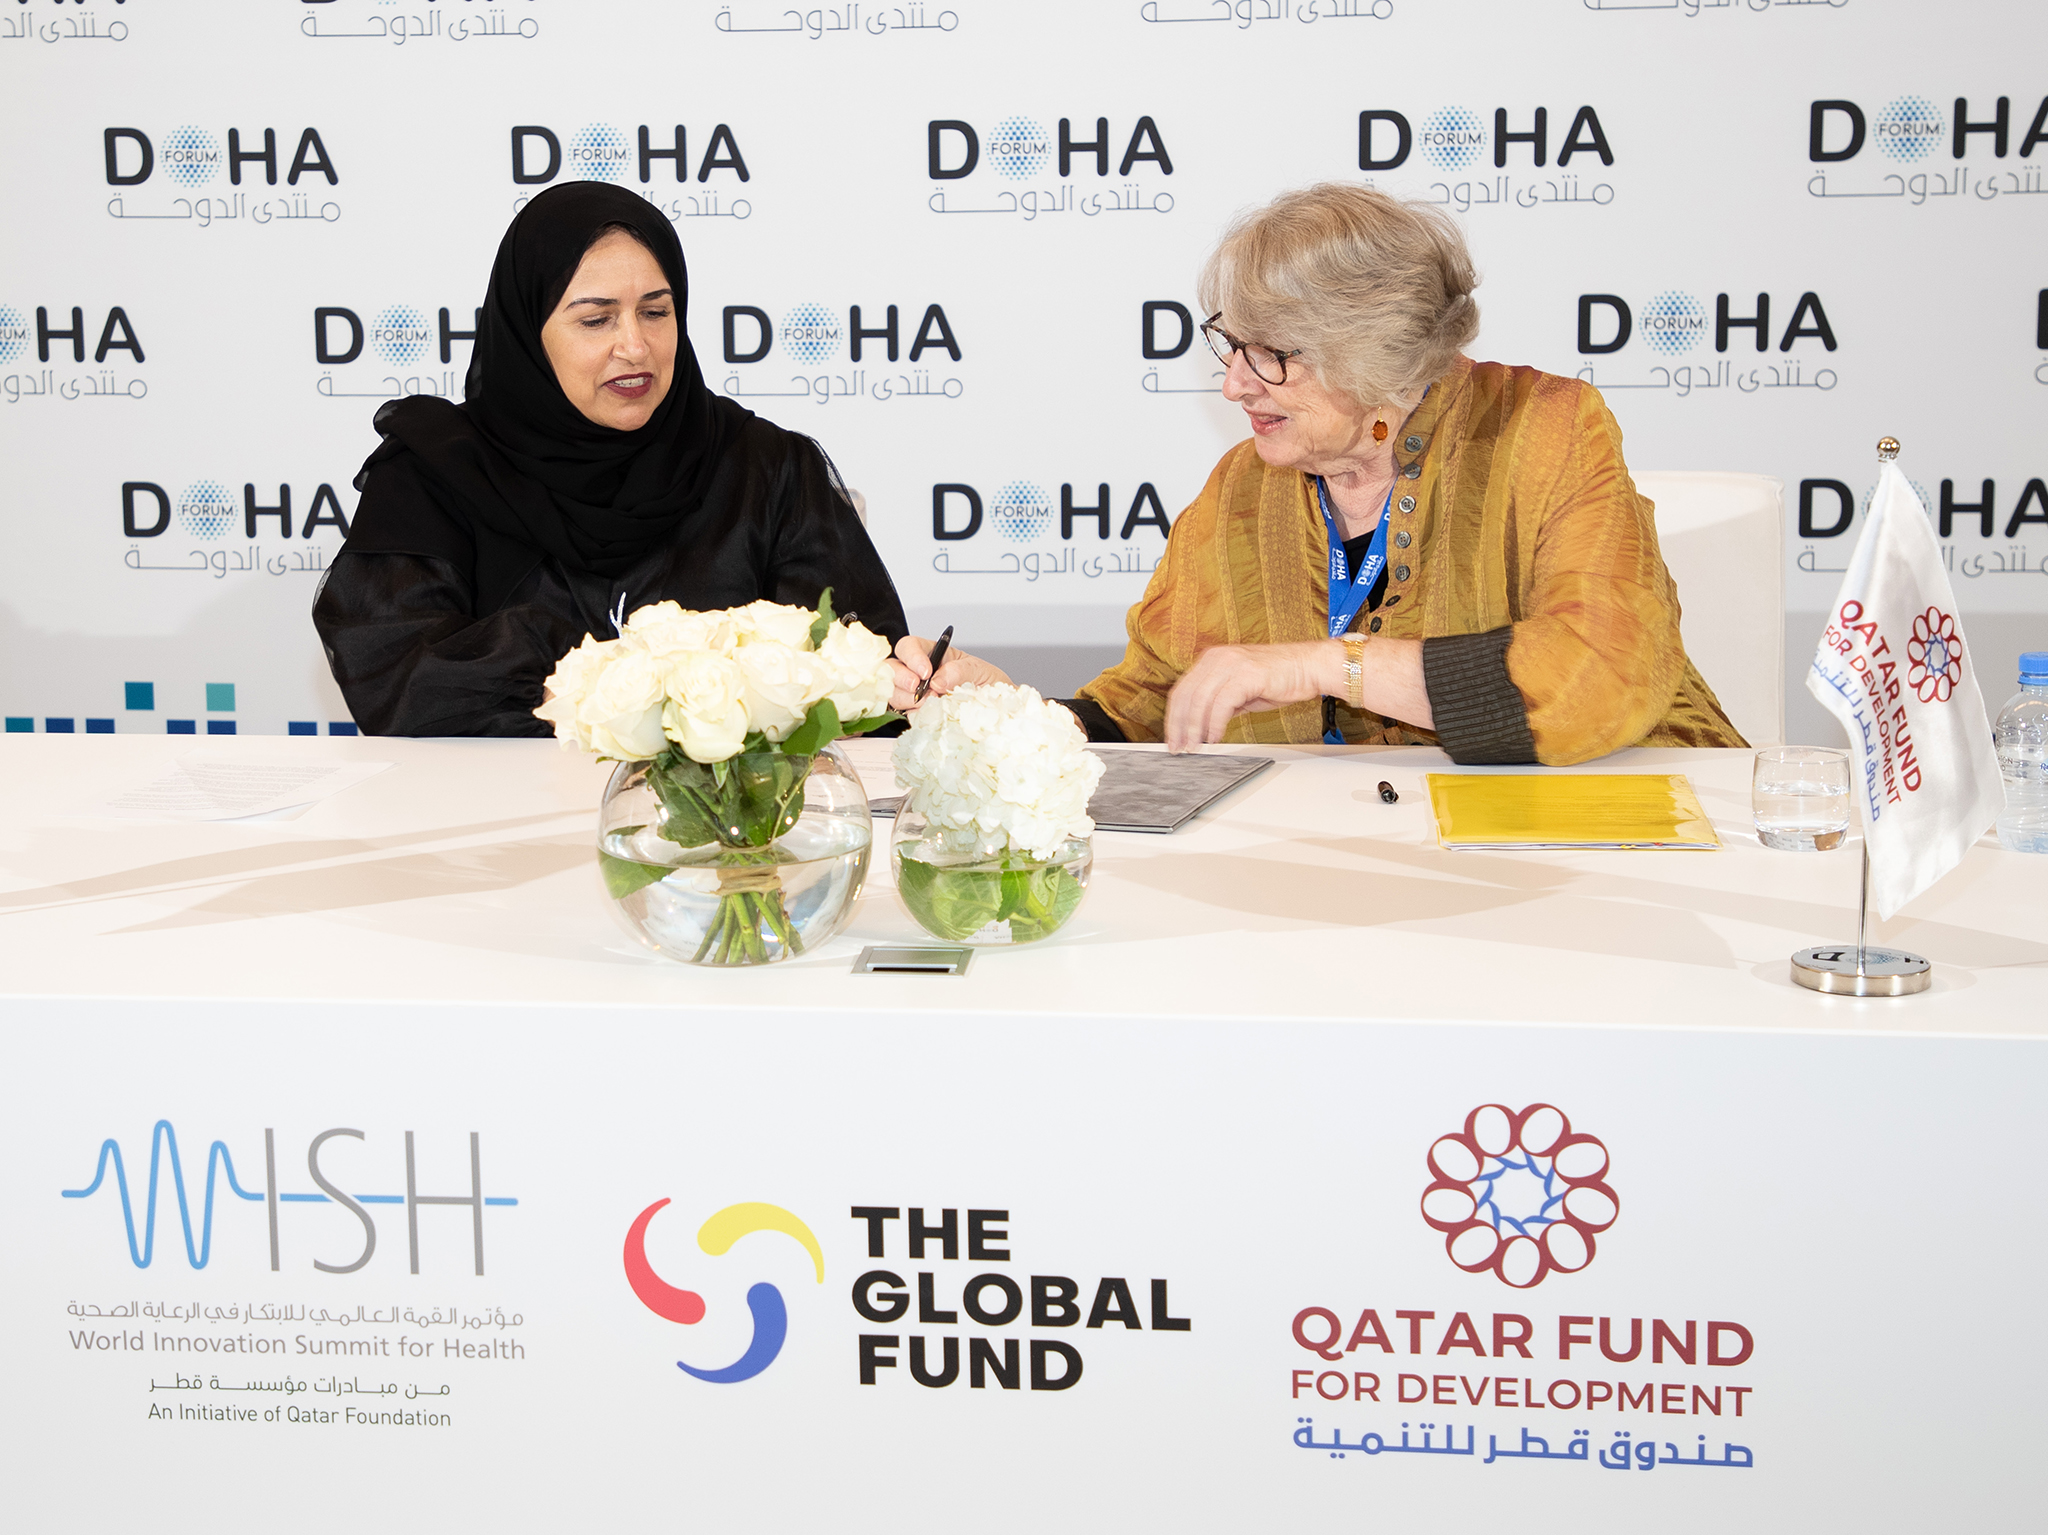 WISH Launches Friends Of The Global Fund Qatar